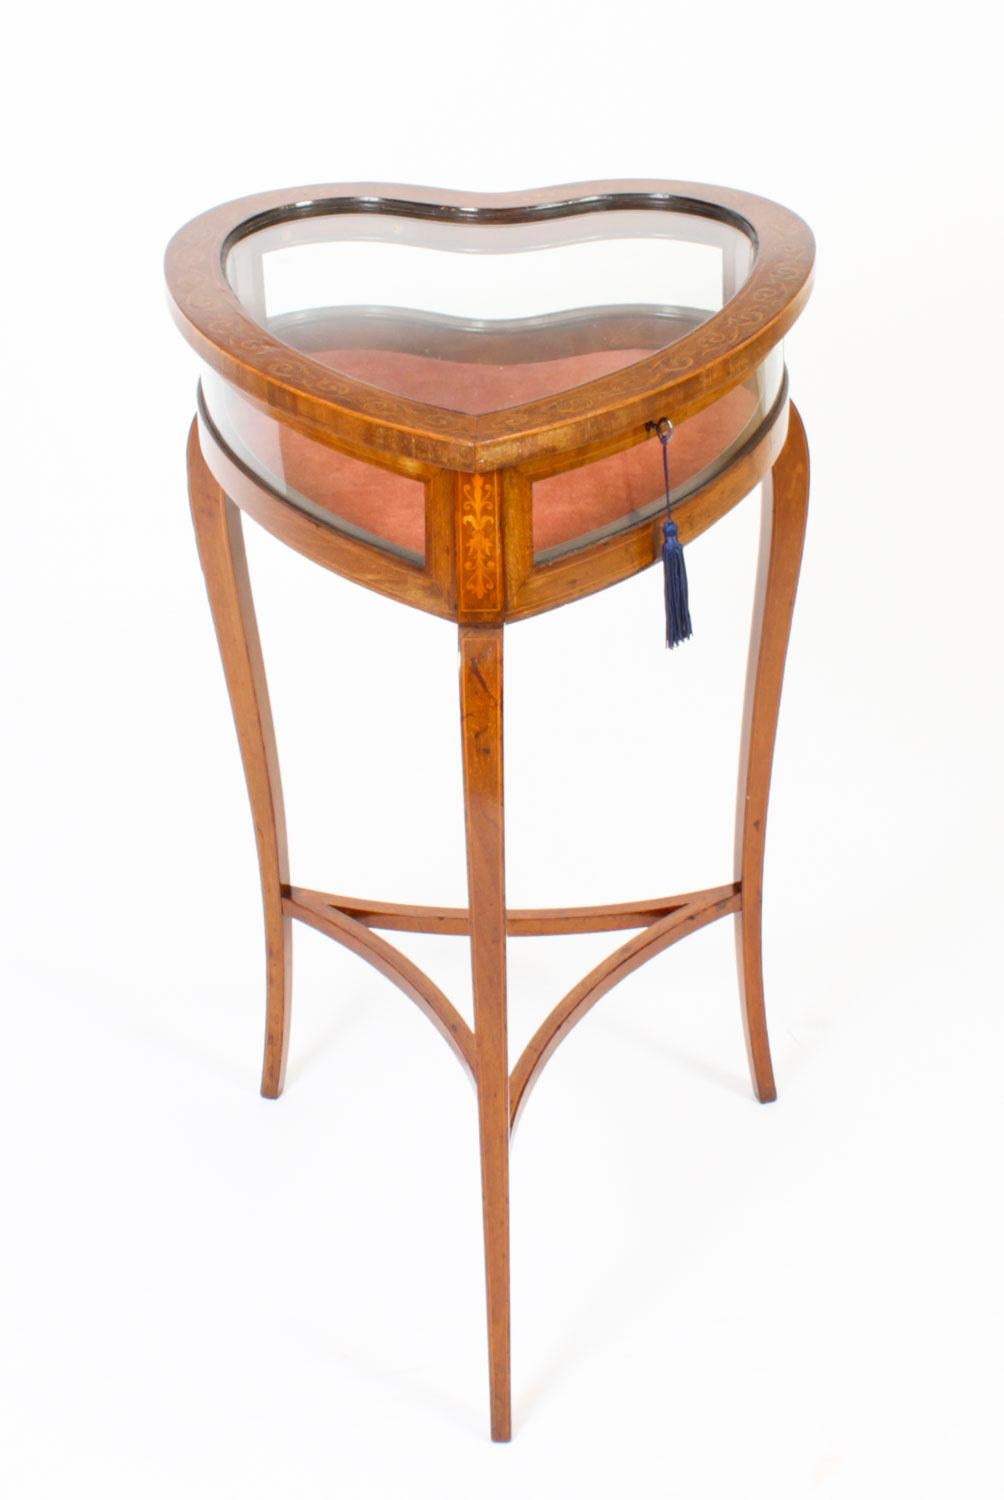 This is an exquisite and wonderful quality antique Edwardian mahogany heart-shaped bijouterie table, circa 1890 in date.
 
This attractive bijouterie table features a delightful glazed top with glazed sides and its sophisticated tan velvet lining